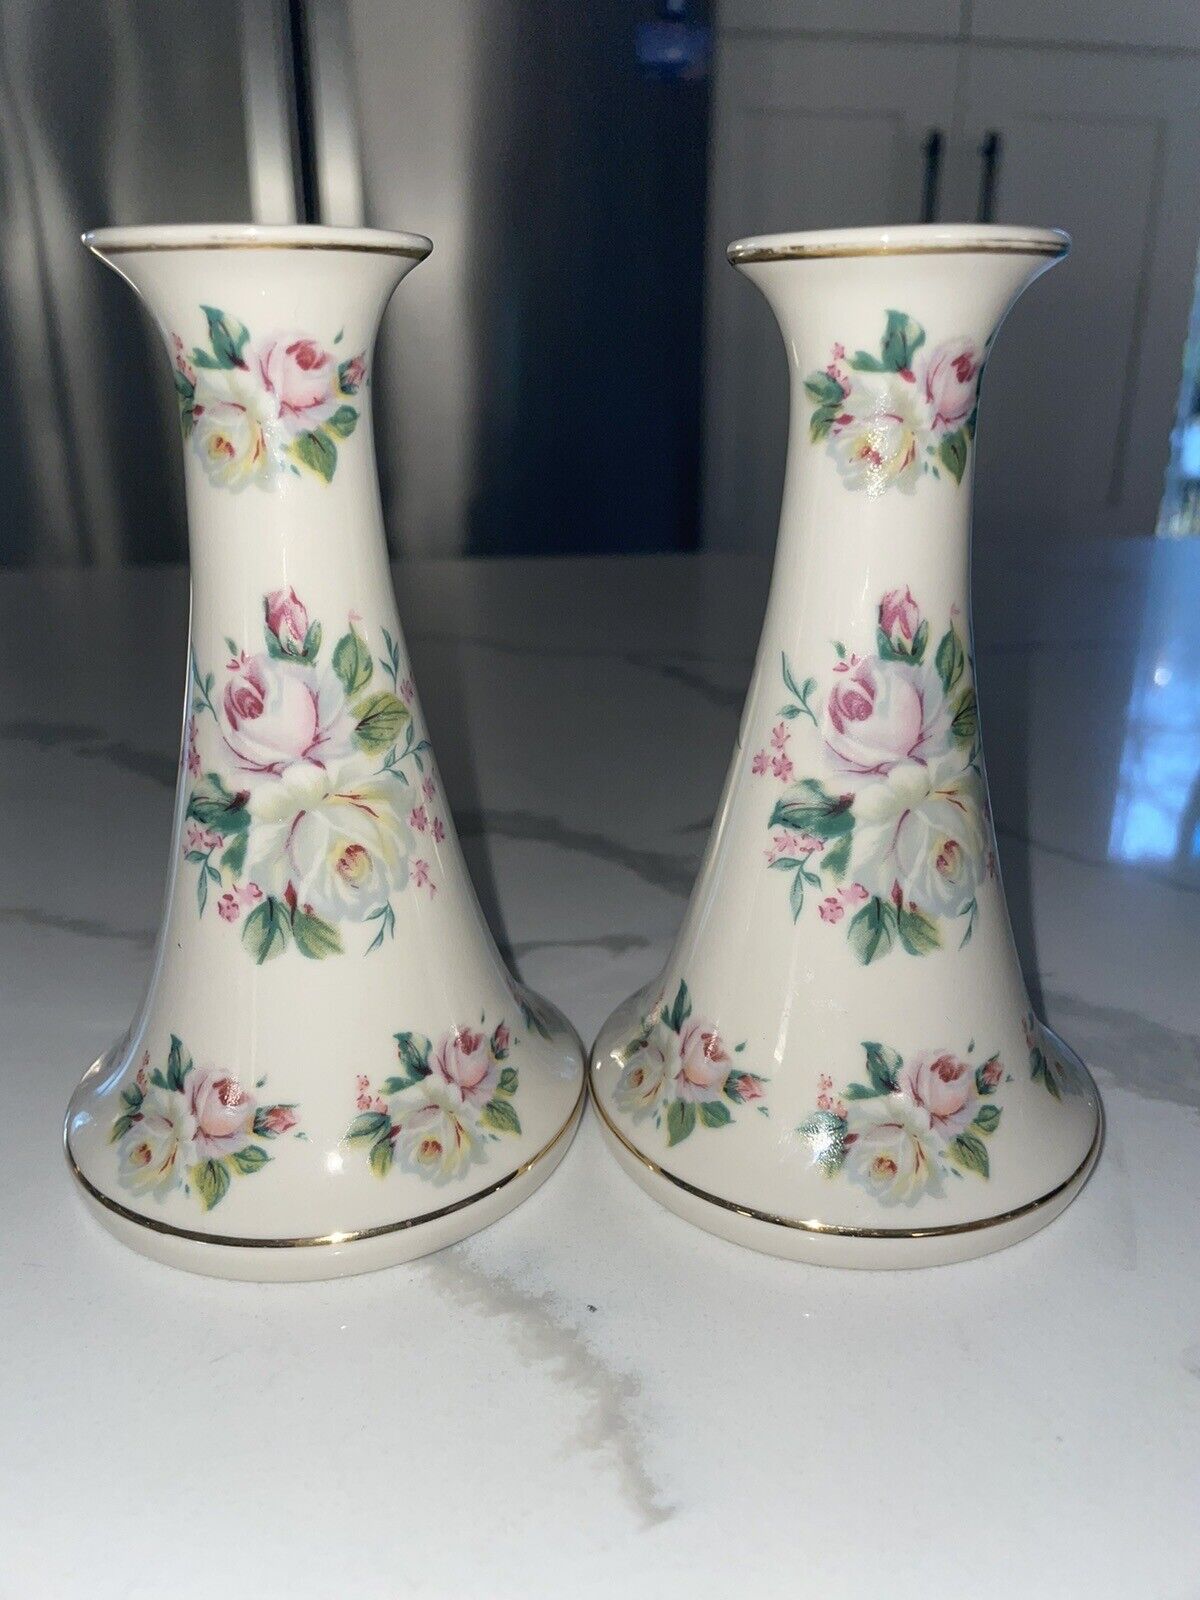 Pair of Ibis Averio Vases From Portugal